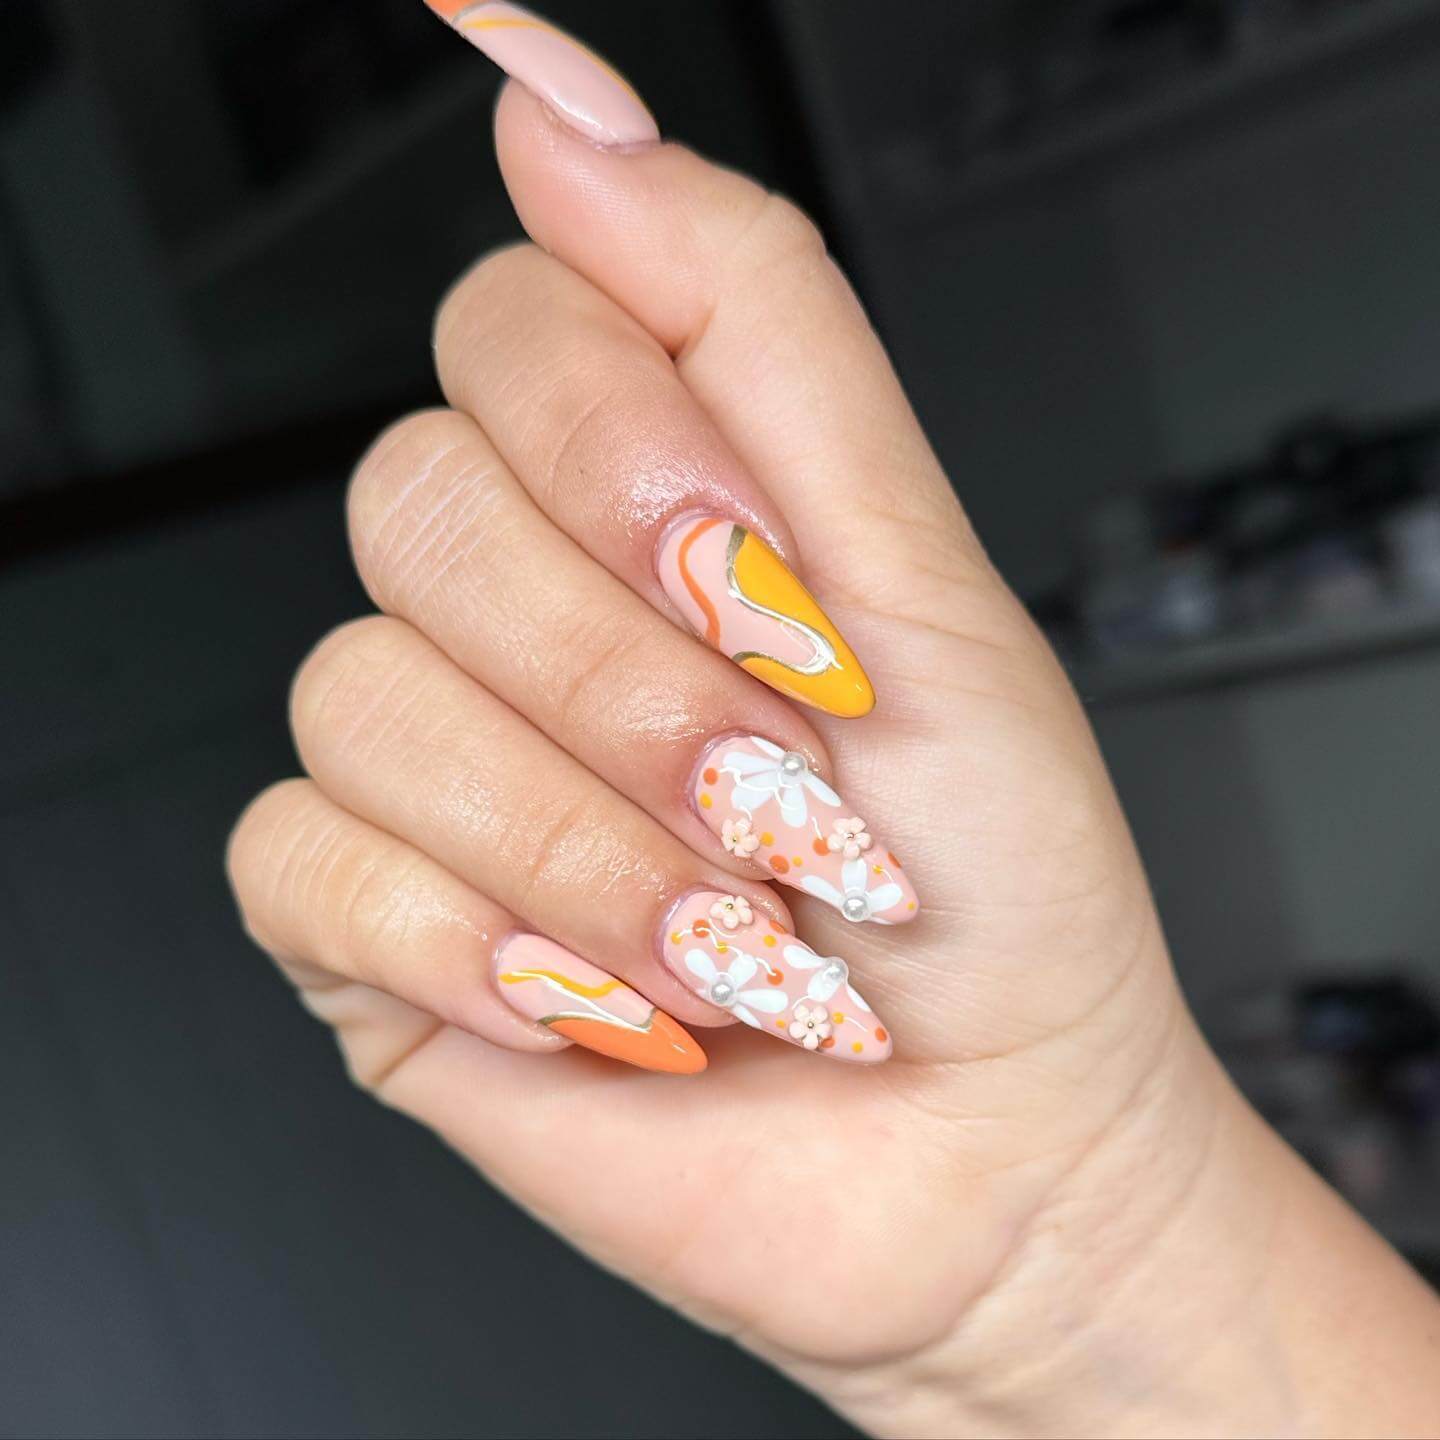 Flowers with Swirl Nail Designs